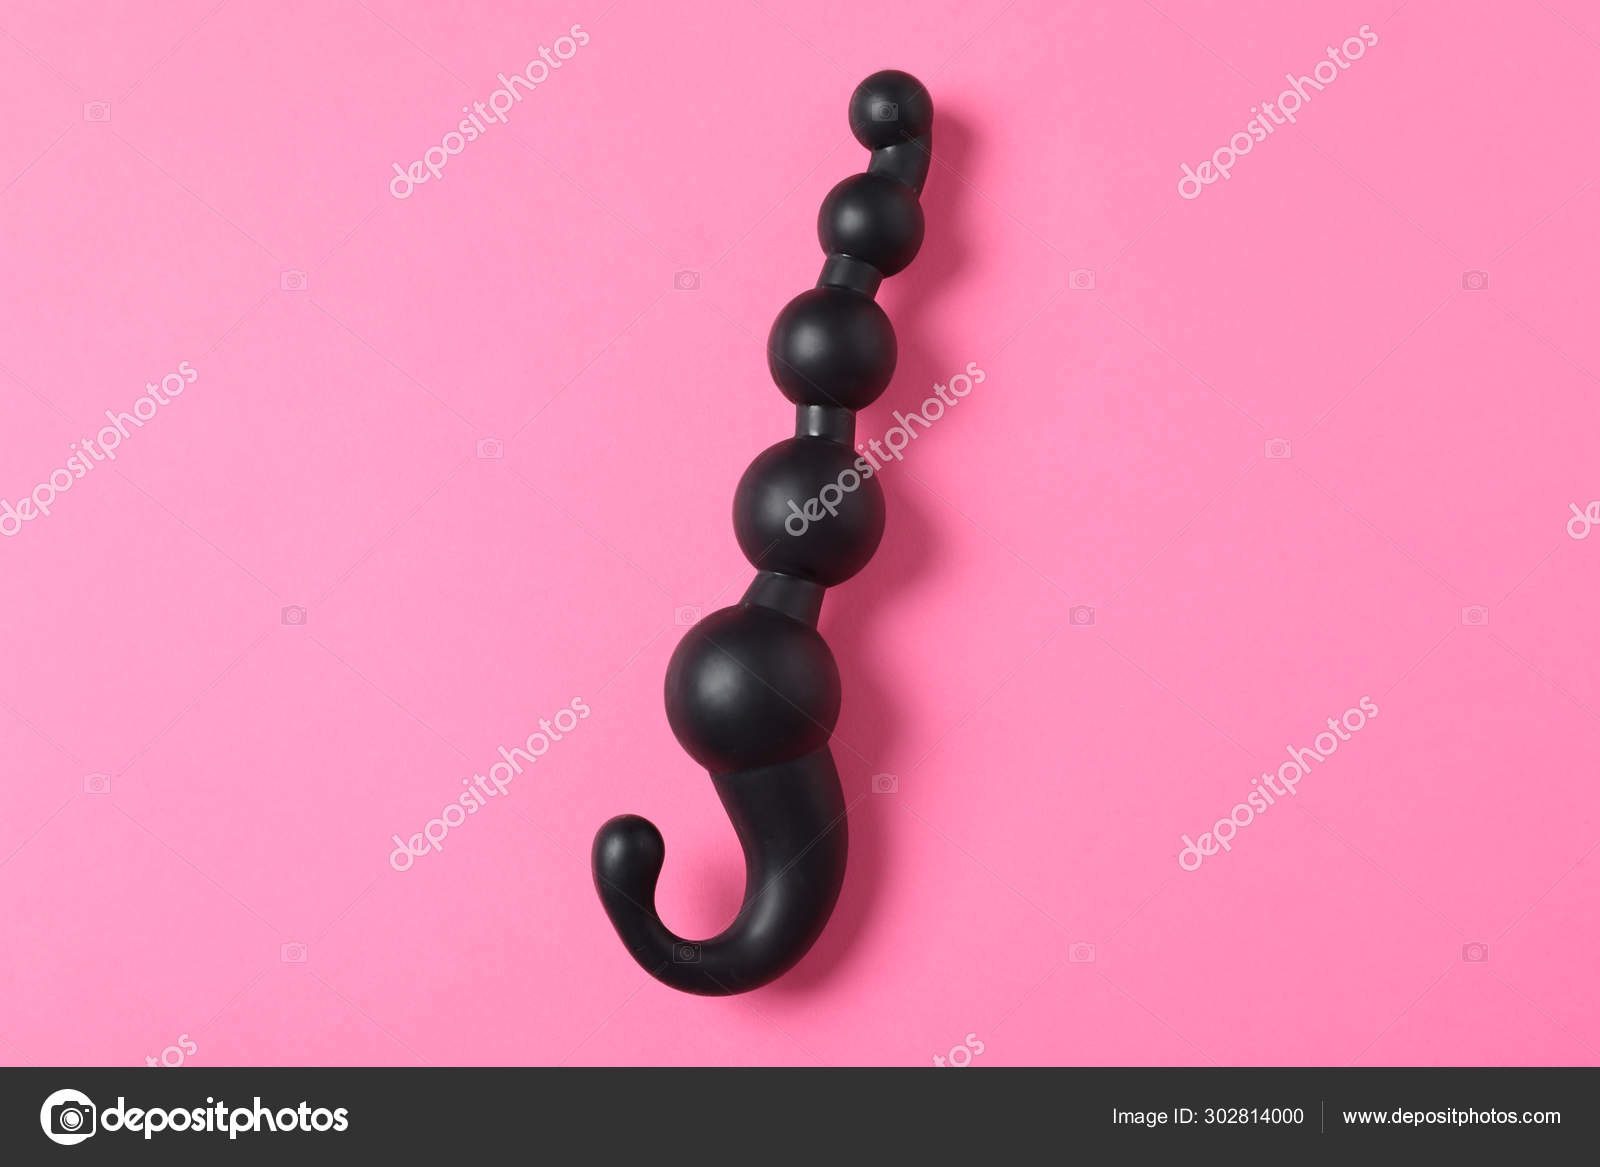 Anal Bead Use Of Illustration - Anal beads Stock Photos, Royalty Free Anal beads Images | Depositphotos